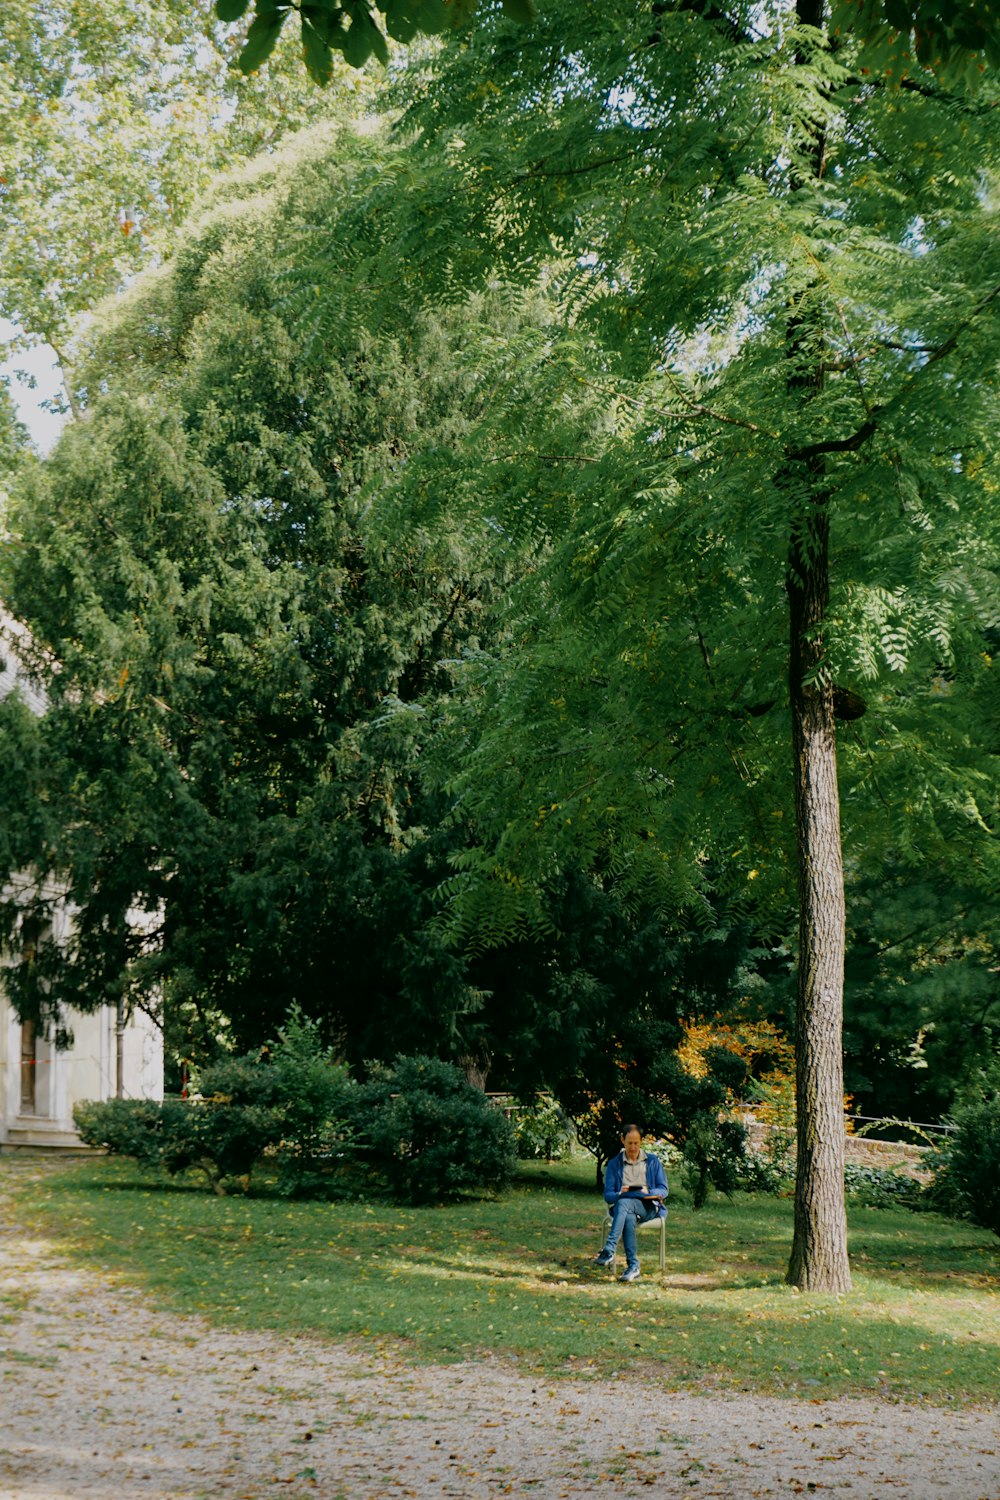 two people walking through a park near a tree